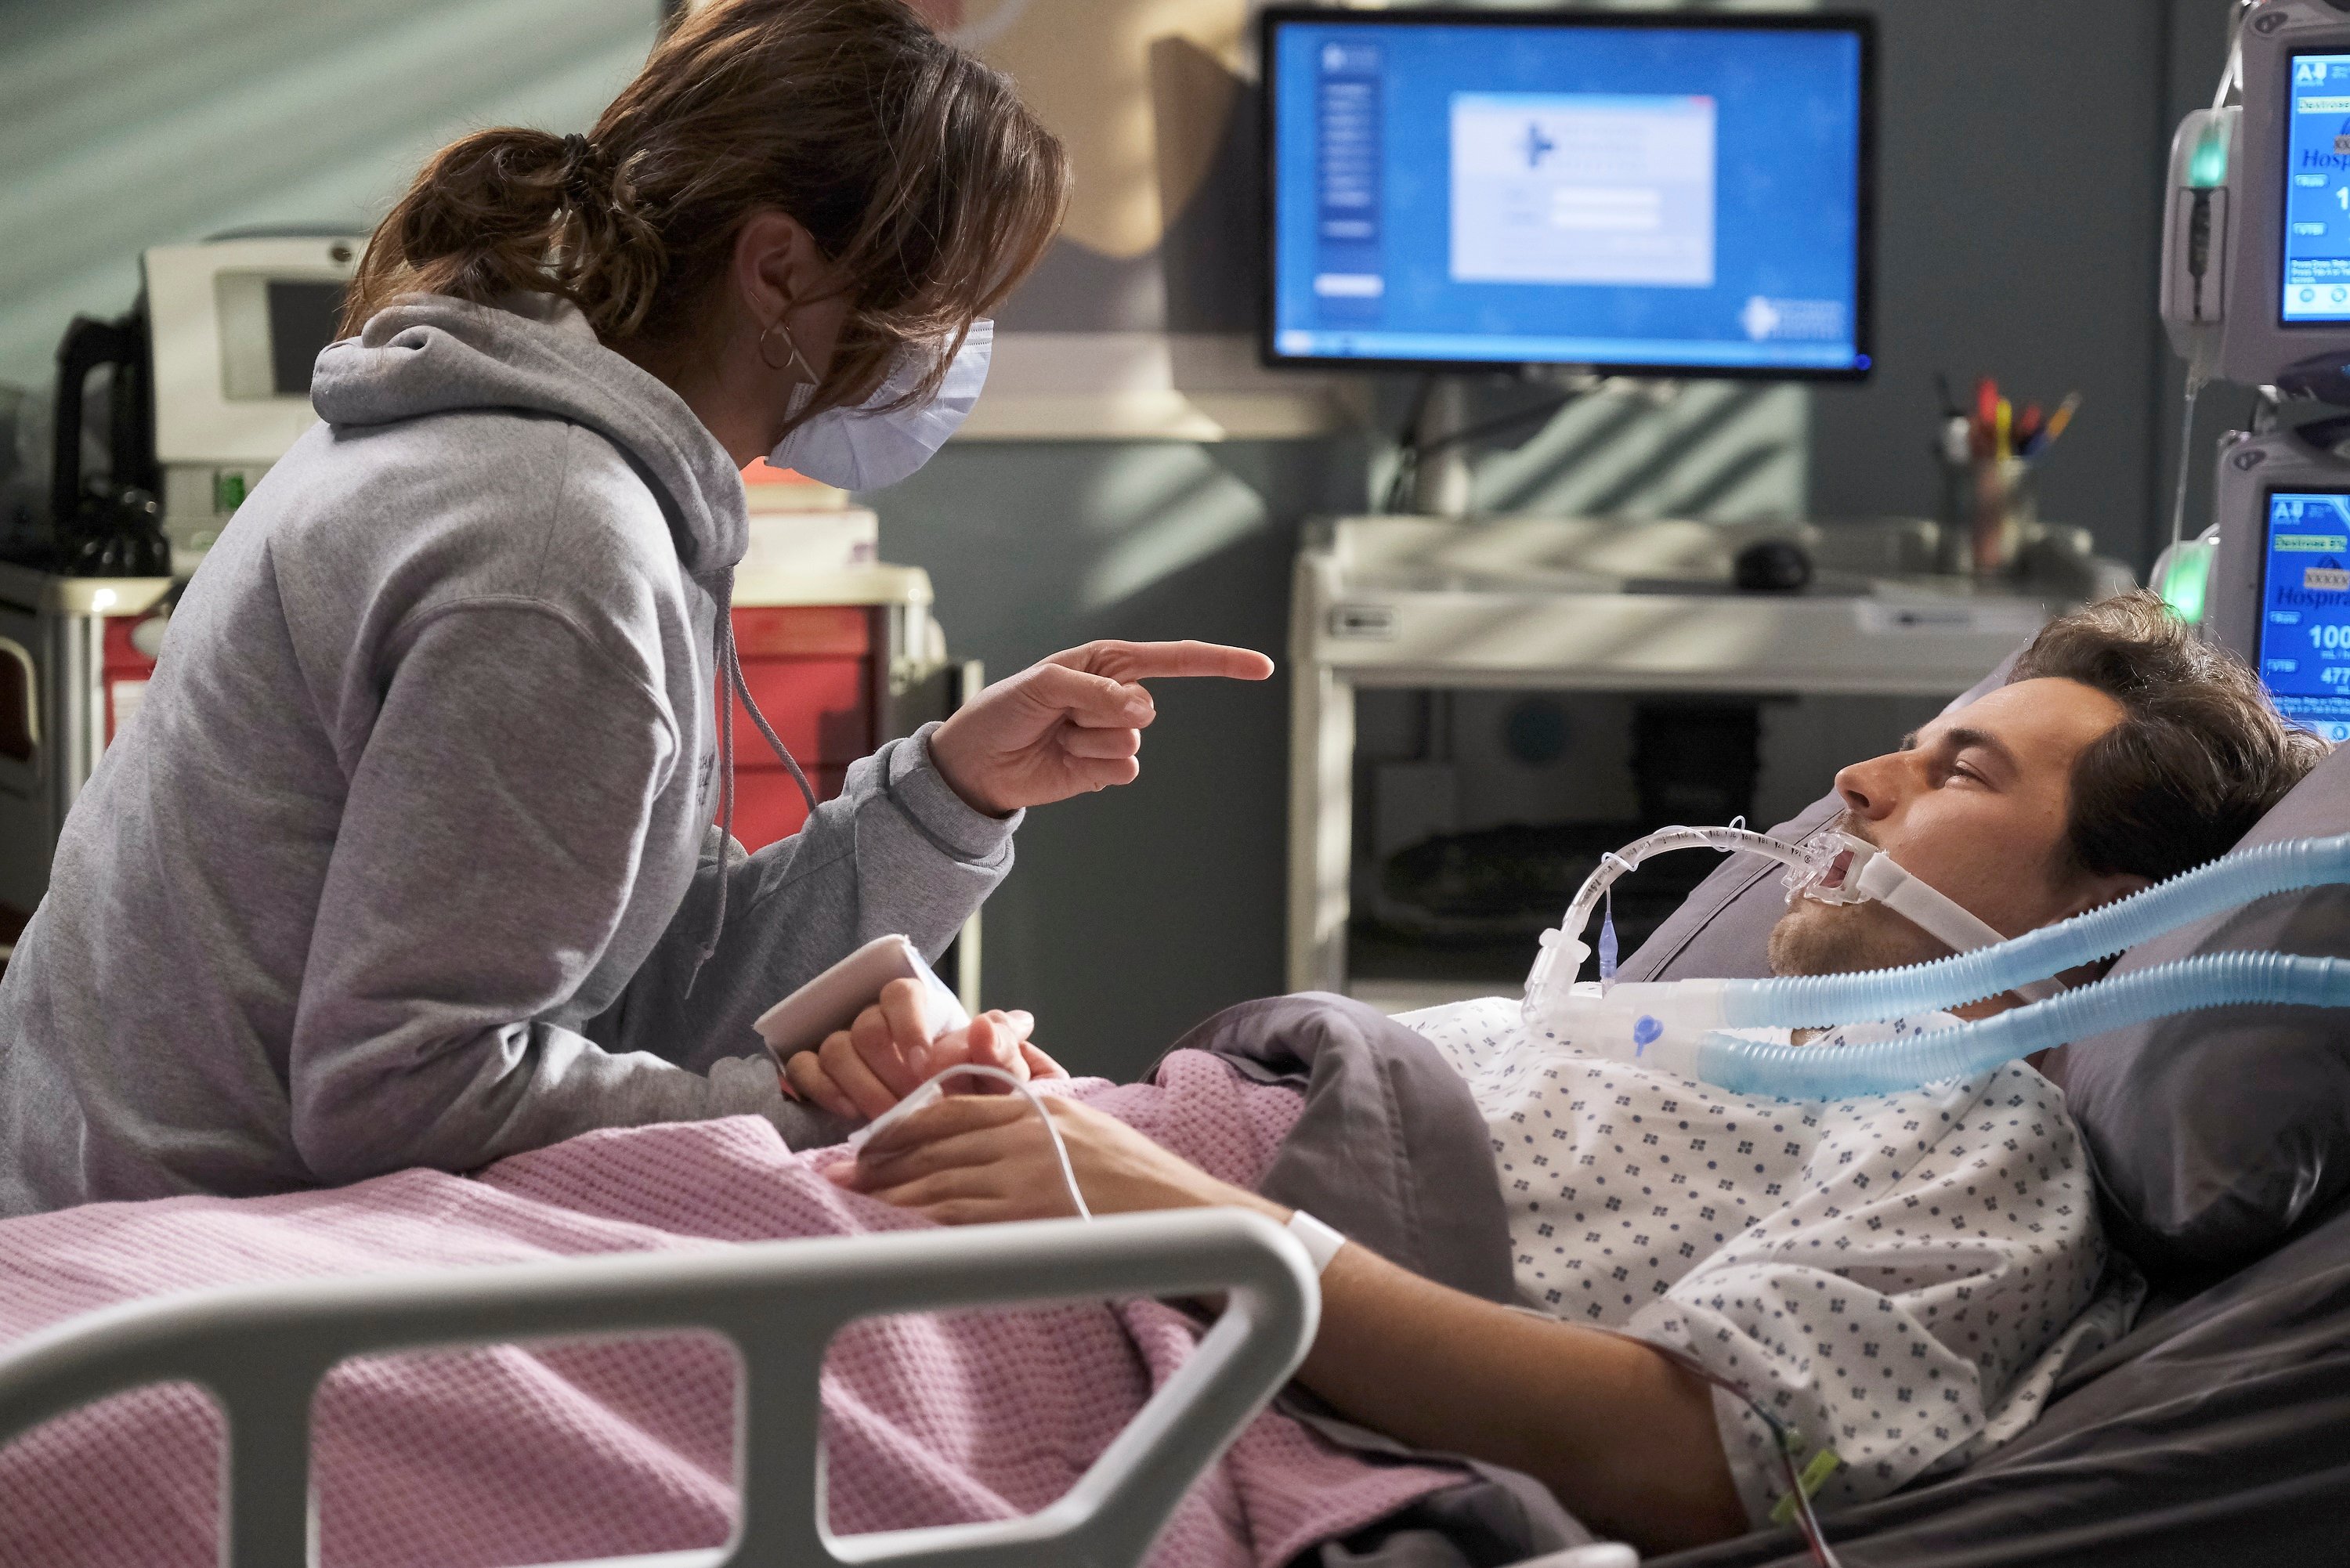 Greys Anatomy Season 17 and the ending of Andrew DeLuca portrayed by Giacomo Gianniotti with Stefania Spampinato as Carina DeLuca